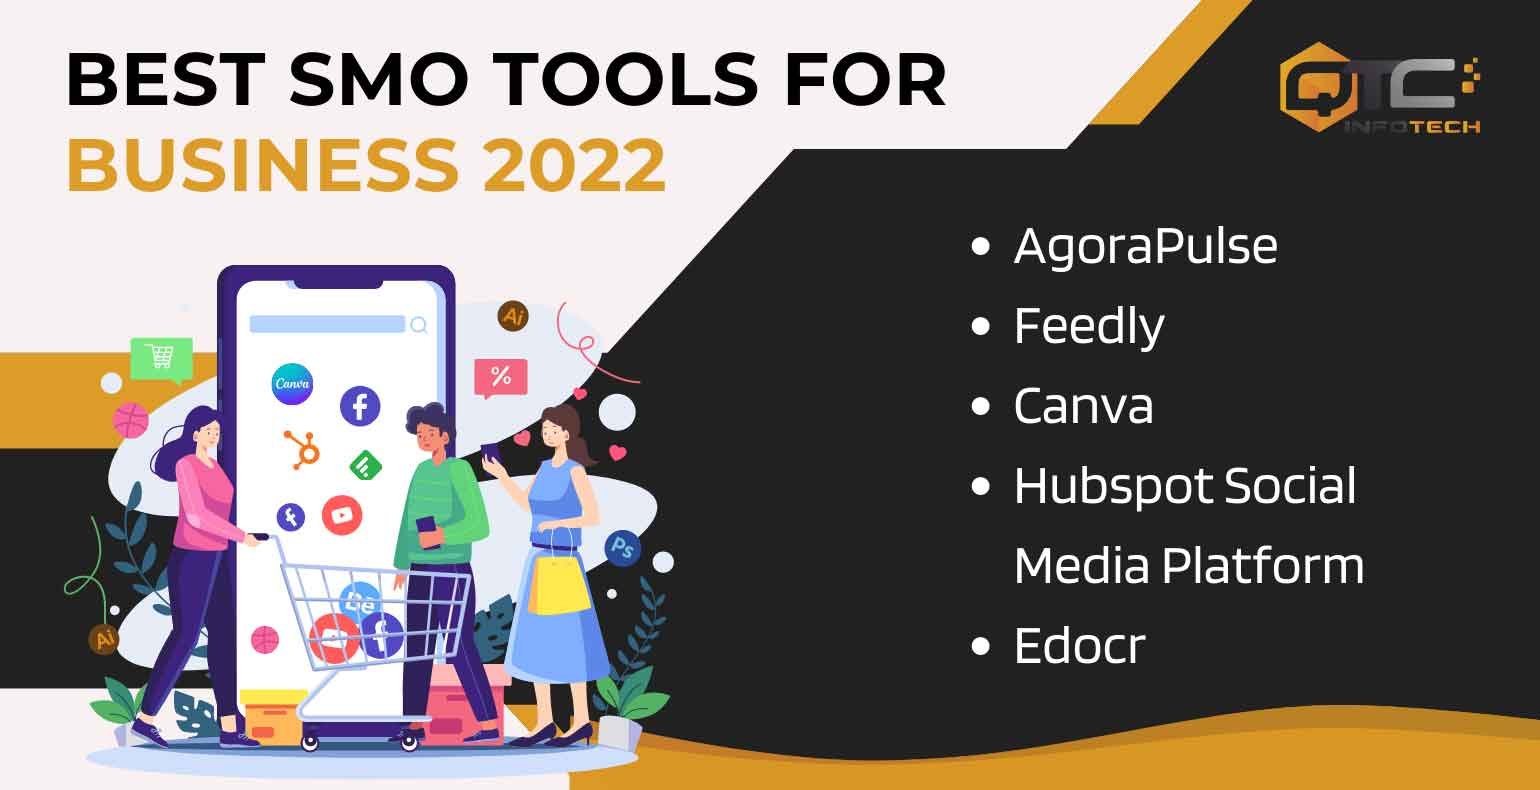 All SMO Tools for Business 2022